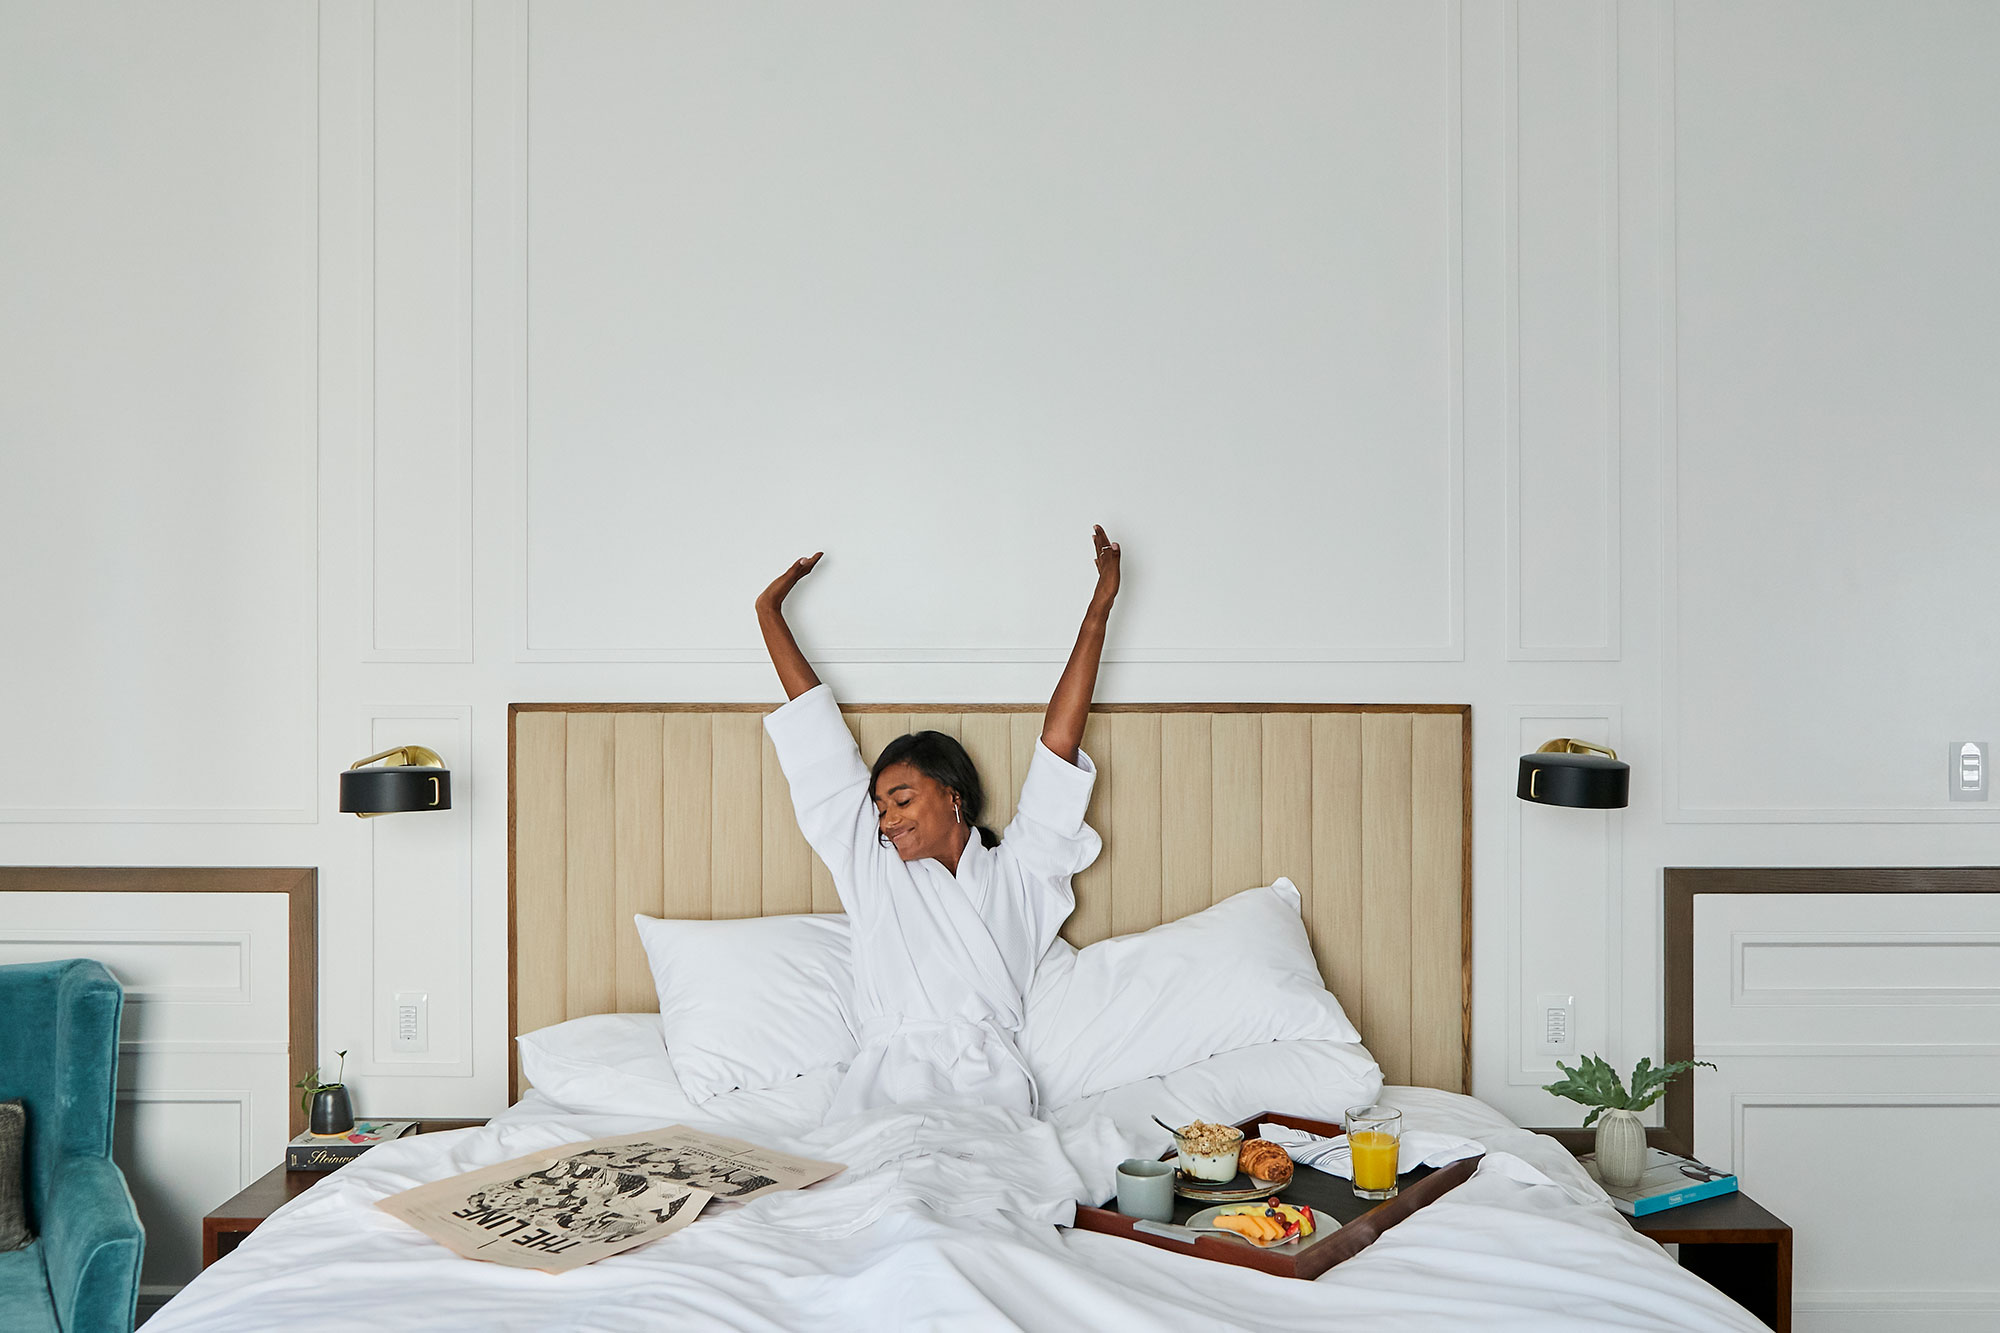 A woman stretching while having breakfast in bed